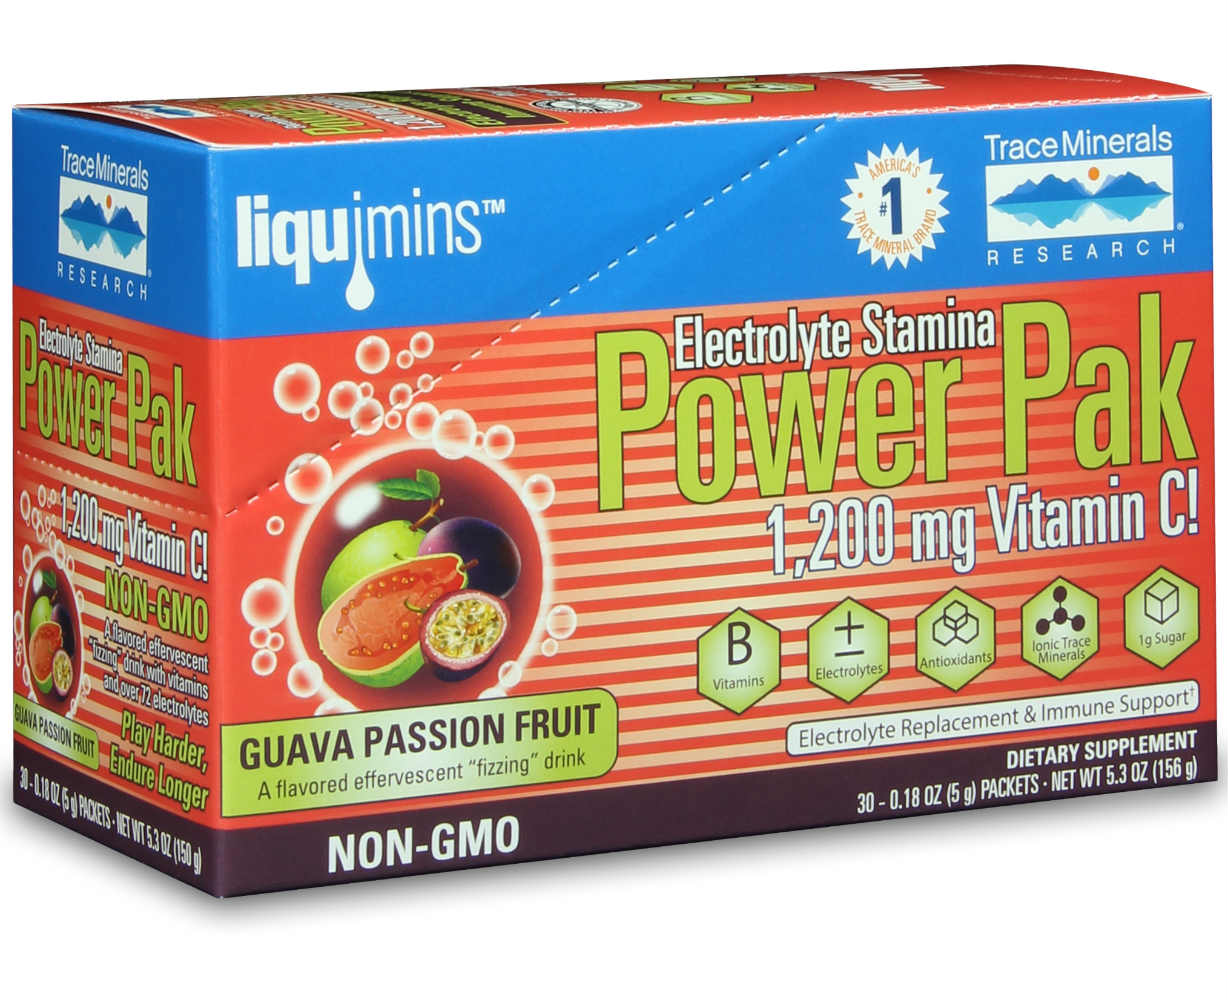 Trace Minerals Research: Electrolyte Stamina Power Pak NON-GMO Guava Passion Fruit 30 pak